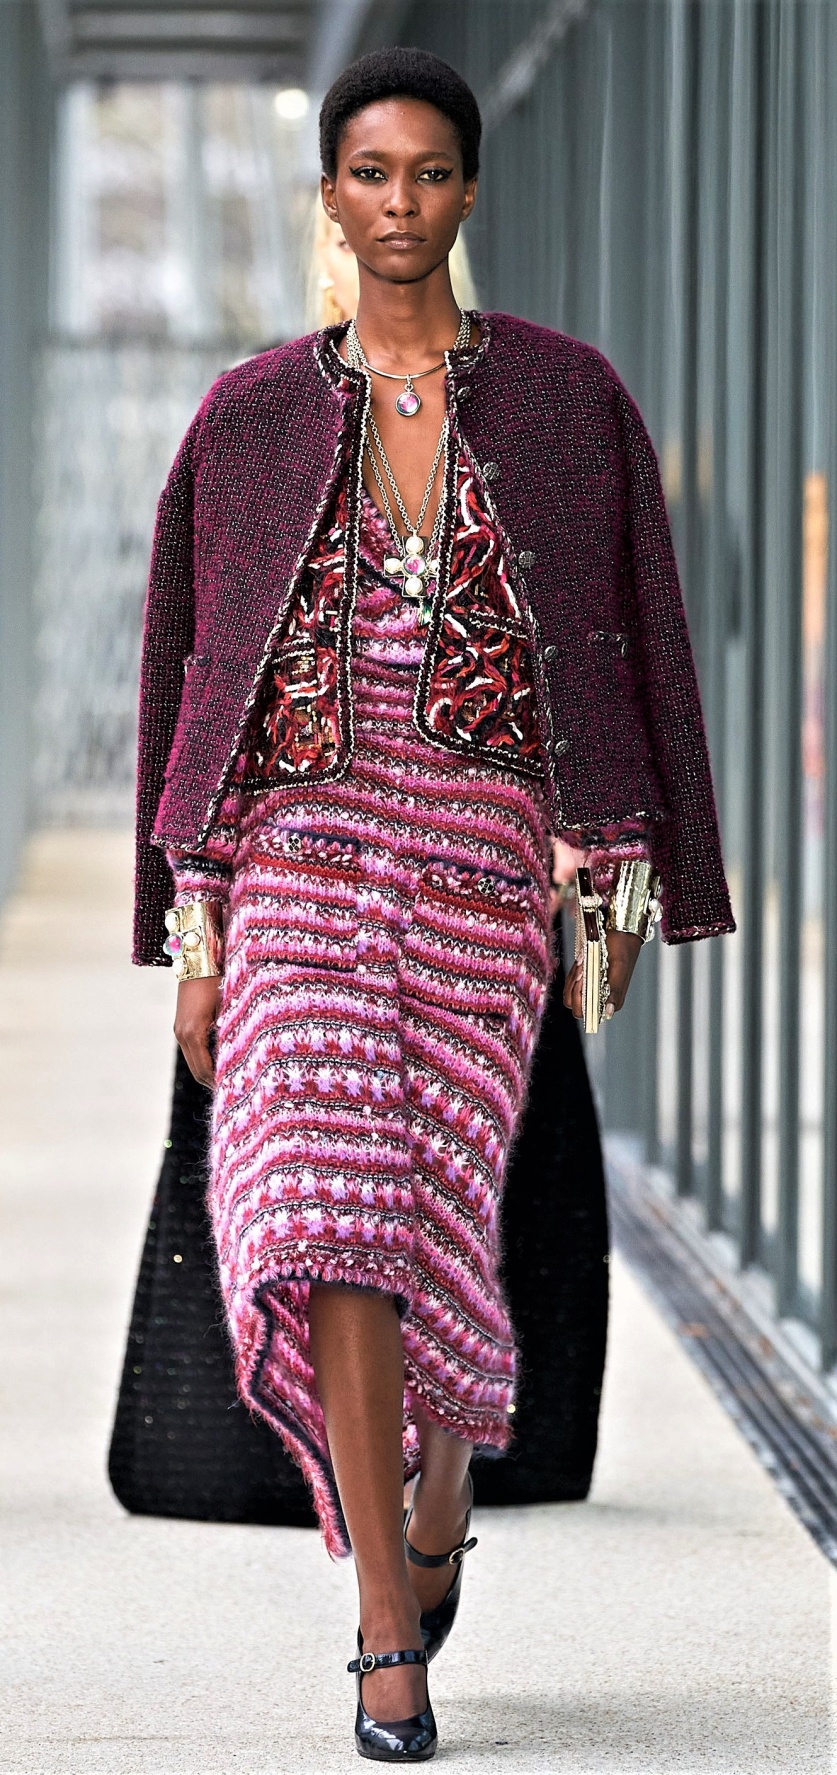 Chanel PreFall 12-21 layers vogue cropped.jpg